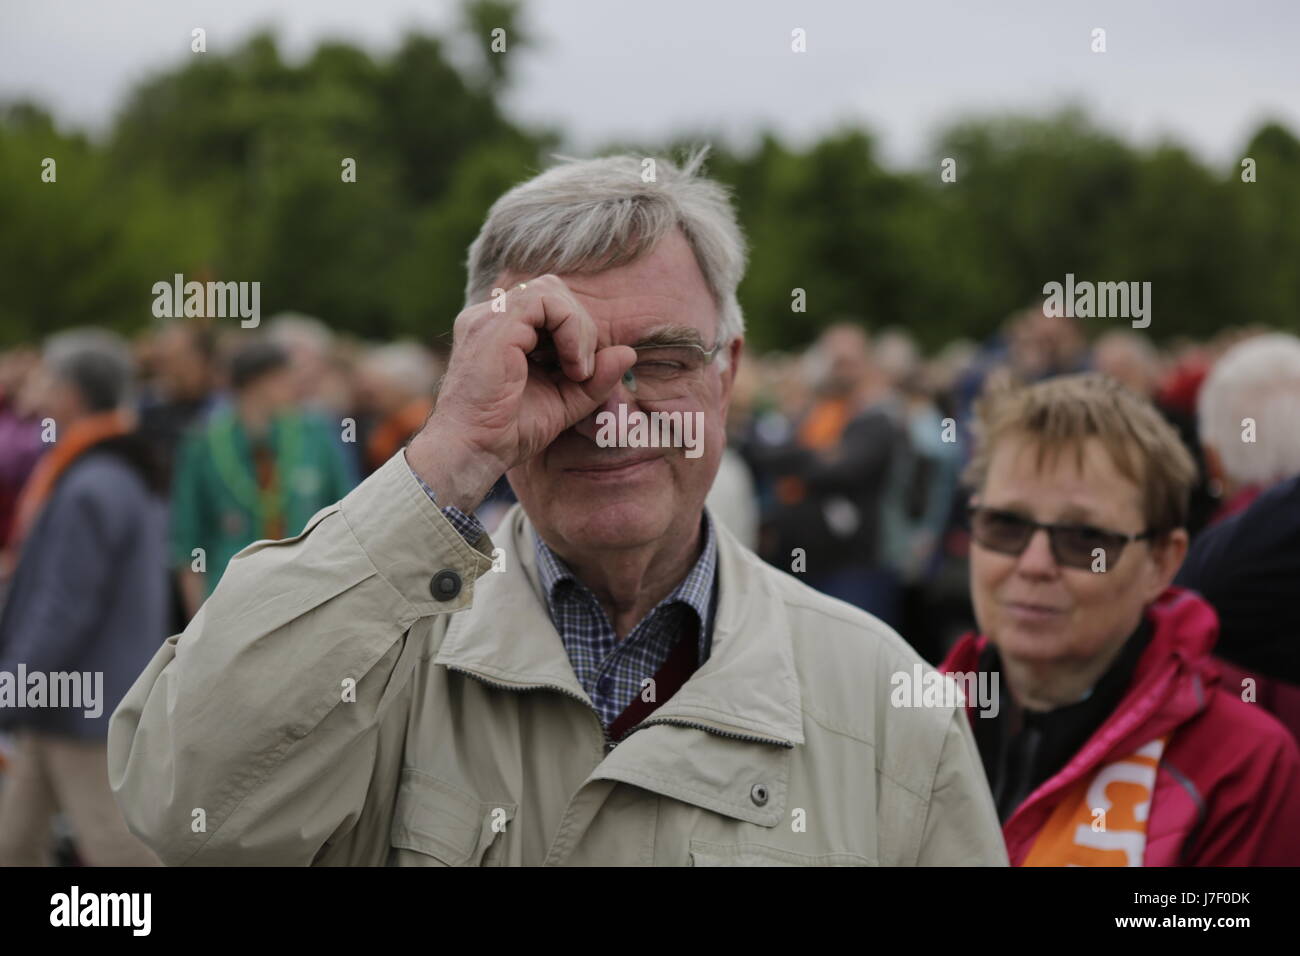 A pilgrim make the gesture of watching something with a telescope, which hints at the slogan of the Kirchentag 'You see me' and is intended to be used as flashmob during the congress. Tens of thousands of people attended the opening services of the 36th German Protestant Church Congress (Evangelischer Kirchentag). The Congress is held from 24. to 28. May in Berlin and more than 100,000 visitors are expected to attend. The congress coincides with the 500. anniversary of the Reformation. Photo: Cronos/Michael Debets Stock Photo